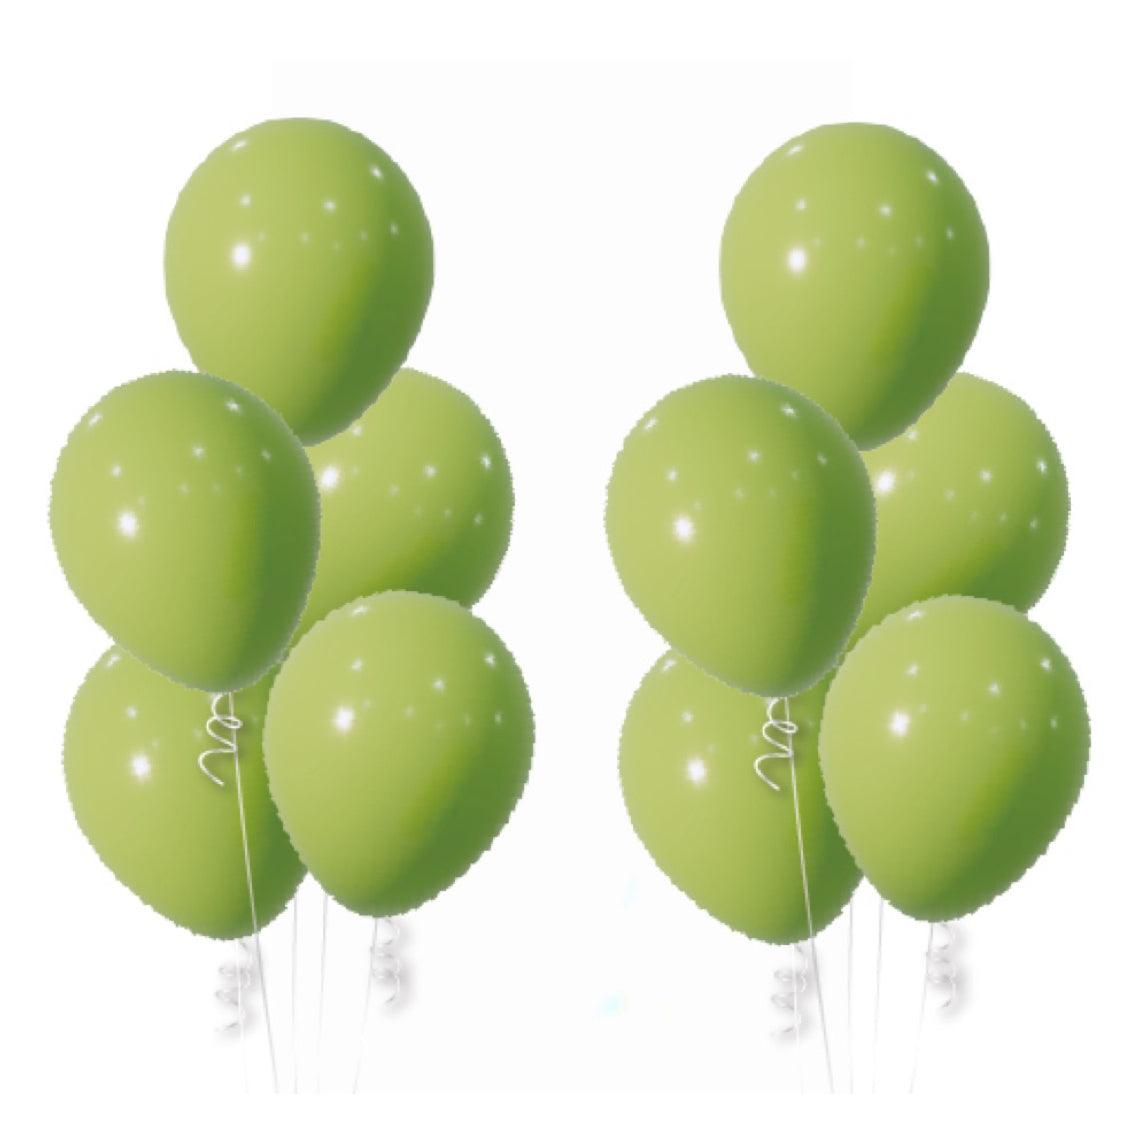 Lime green lemonade helium balloon 2 bouquets of 5 - ONE UP BALLOONS